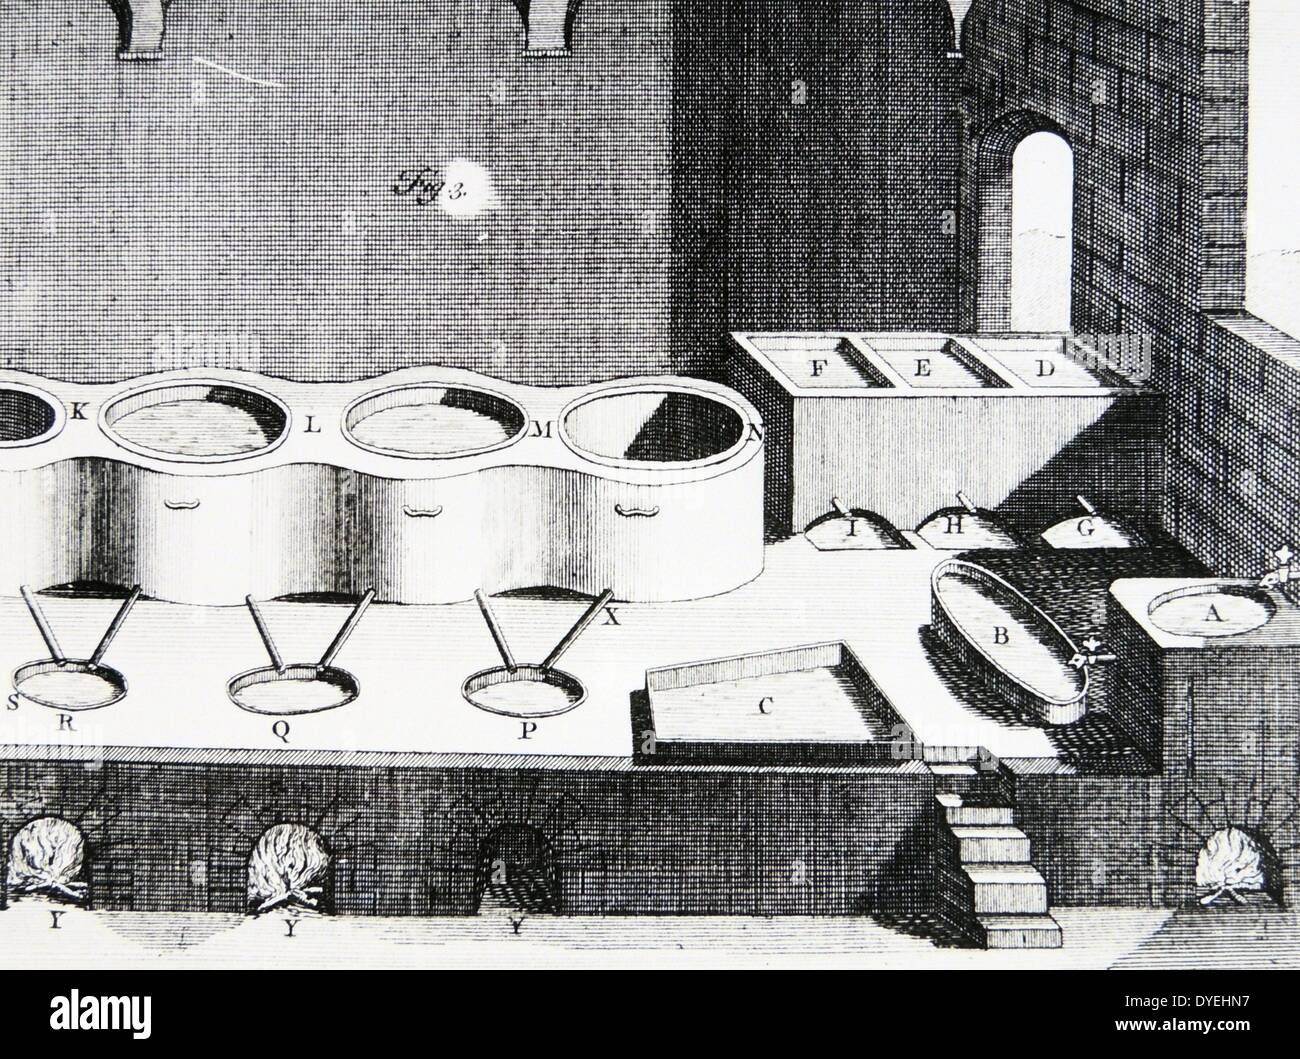 Bleaching house: A, furnace for boiling lye: D,E,F, tanks for strongest lye: C, settling tank: K,L,M, tubs for bucking cloth, with pipes to carry excess lye back to furnaces, P,Q,S.  Engraving, onion, 1764. Stock Photo